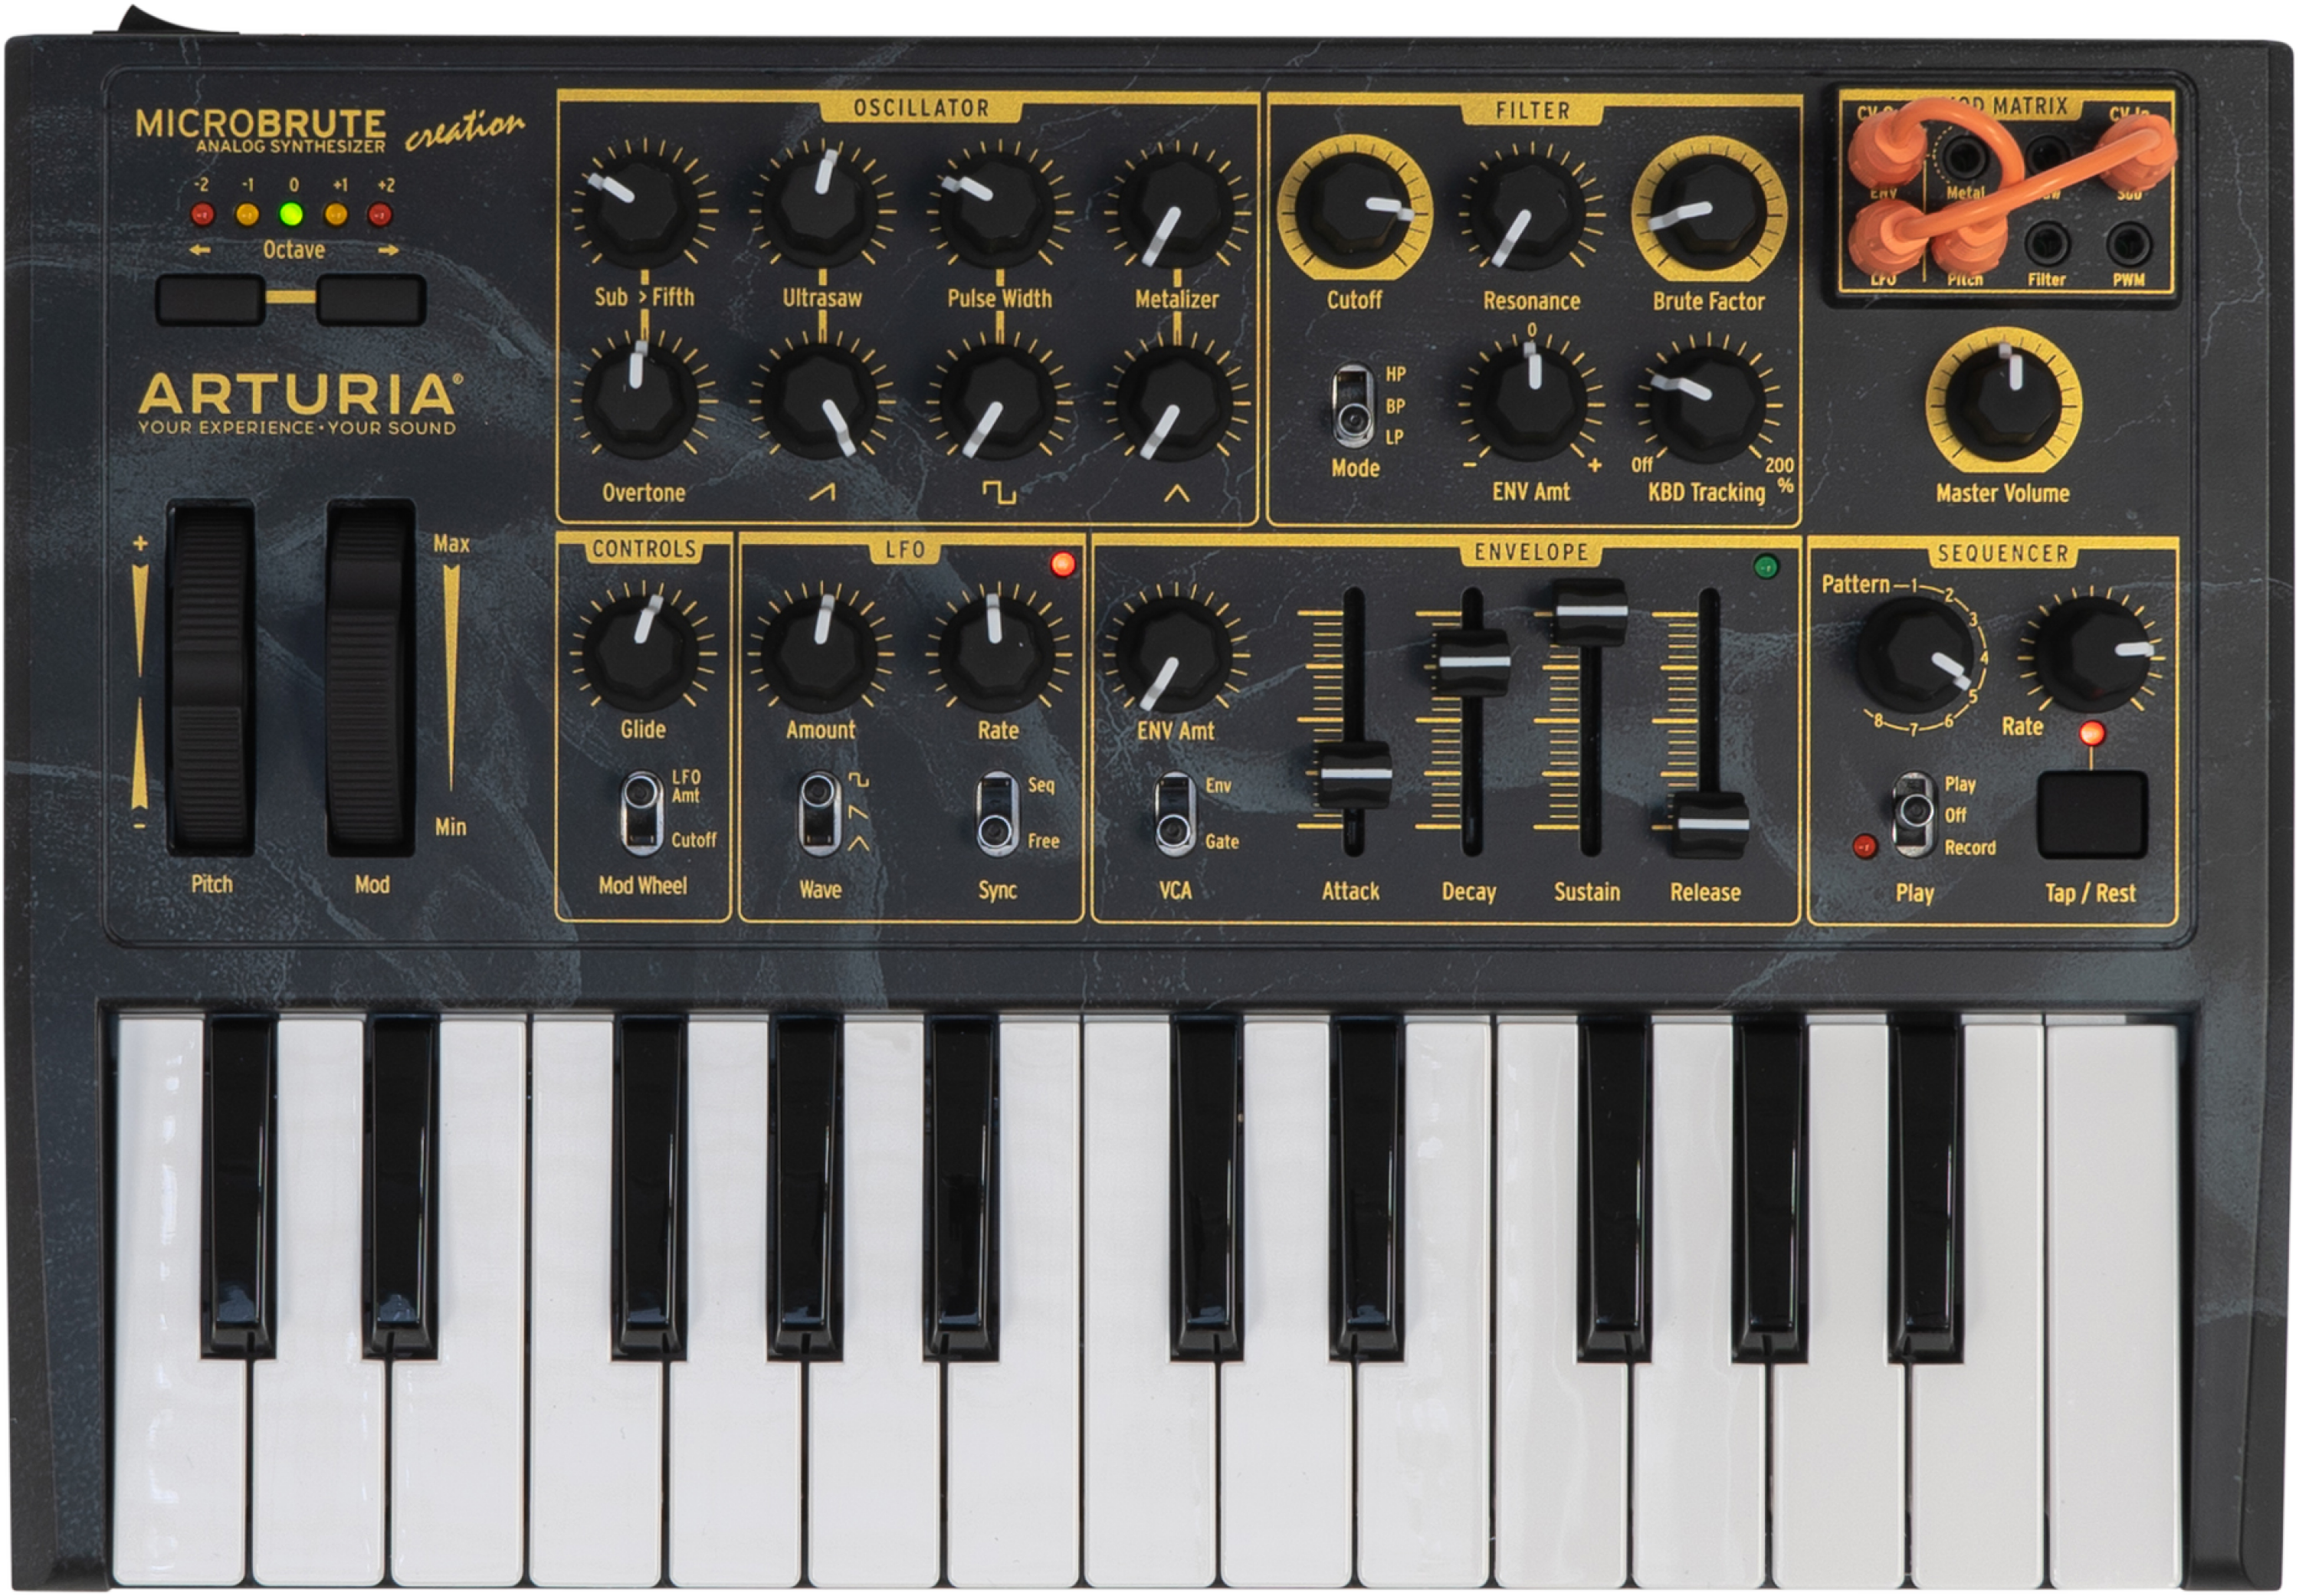 Arturia MicroBrute Analog Synthesizer - Creation Edition | Sweetwater